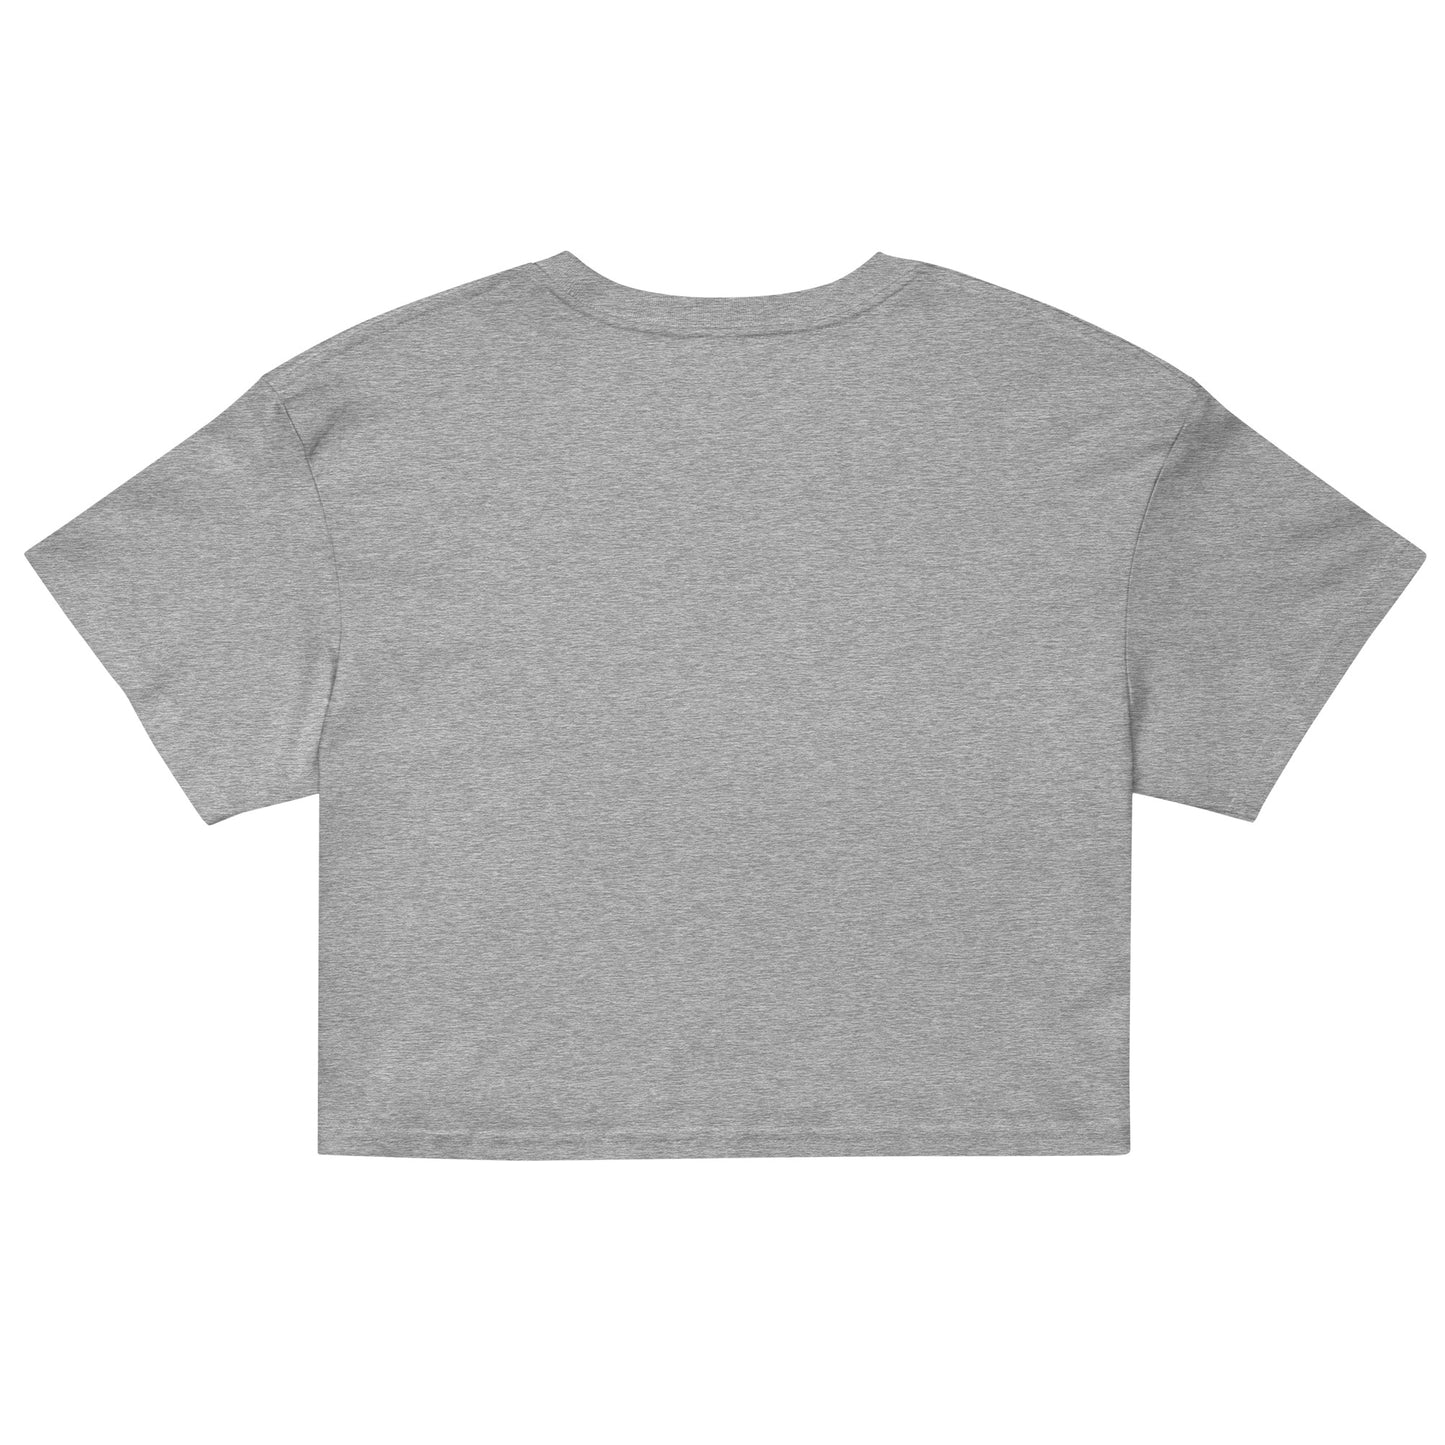 Pedal Faster Mate - Women’s Crop Top